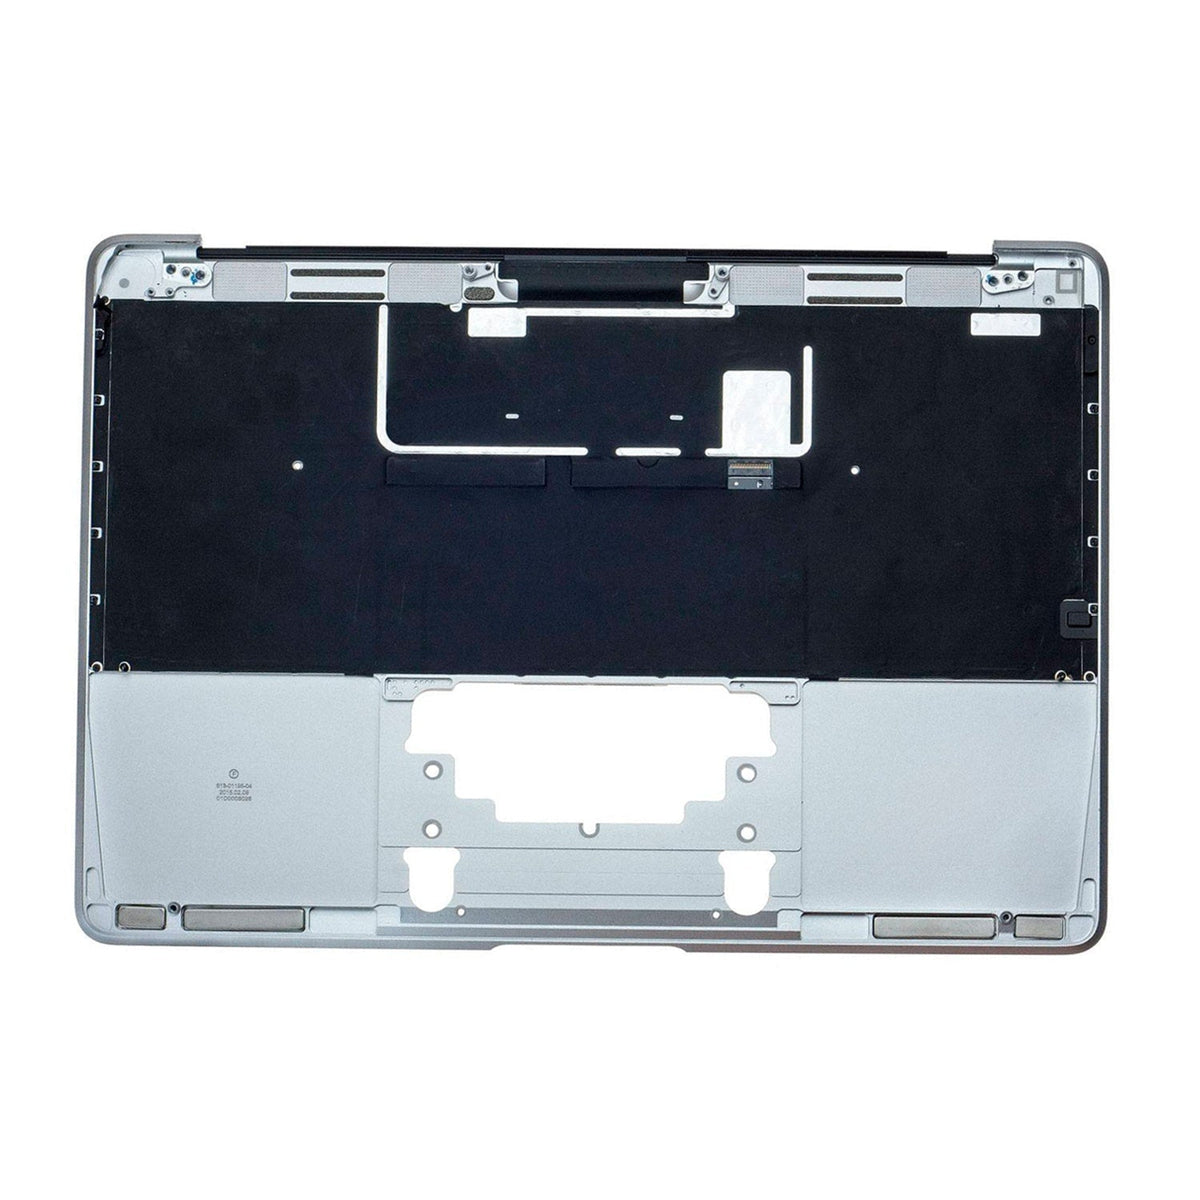 SILVER UPPER CASE WITH KEYBOARD FOR MACBOOK RETINA 12" A1534 (EARLY 2016 - MID 2017)